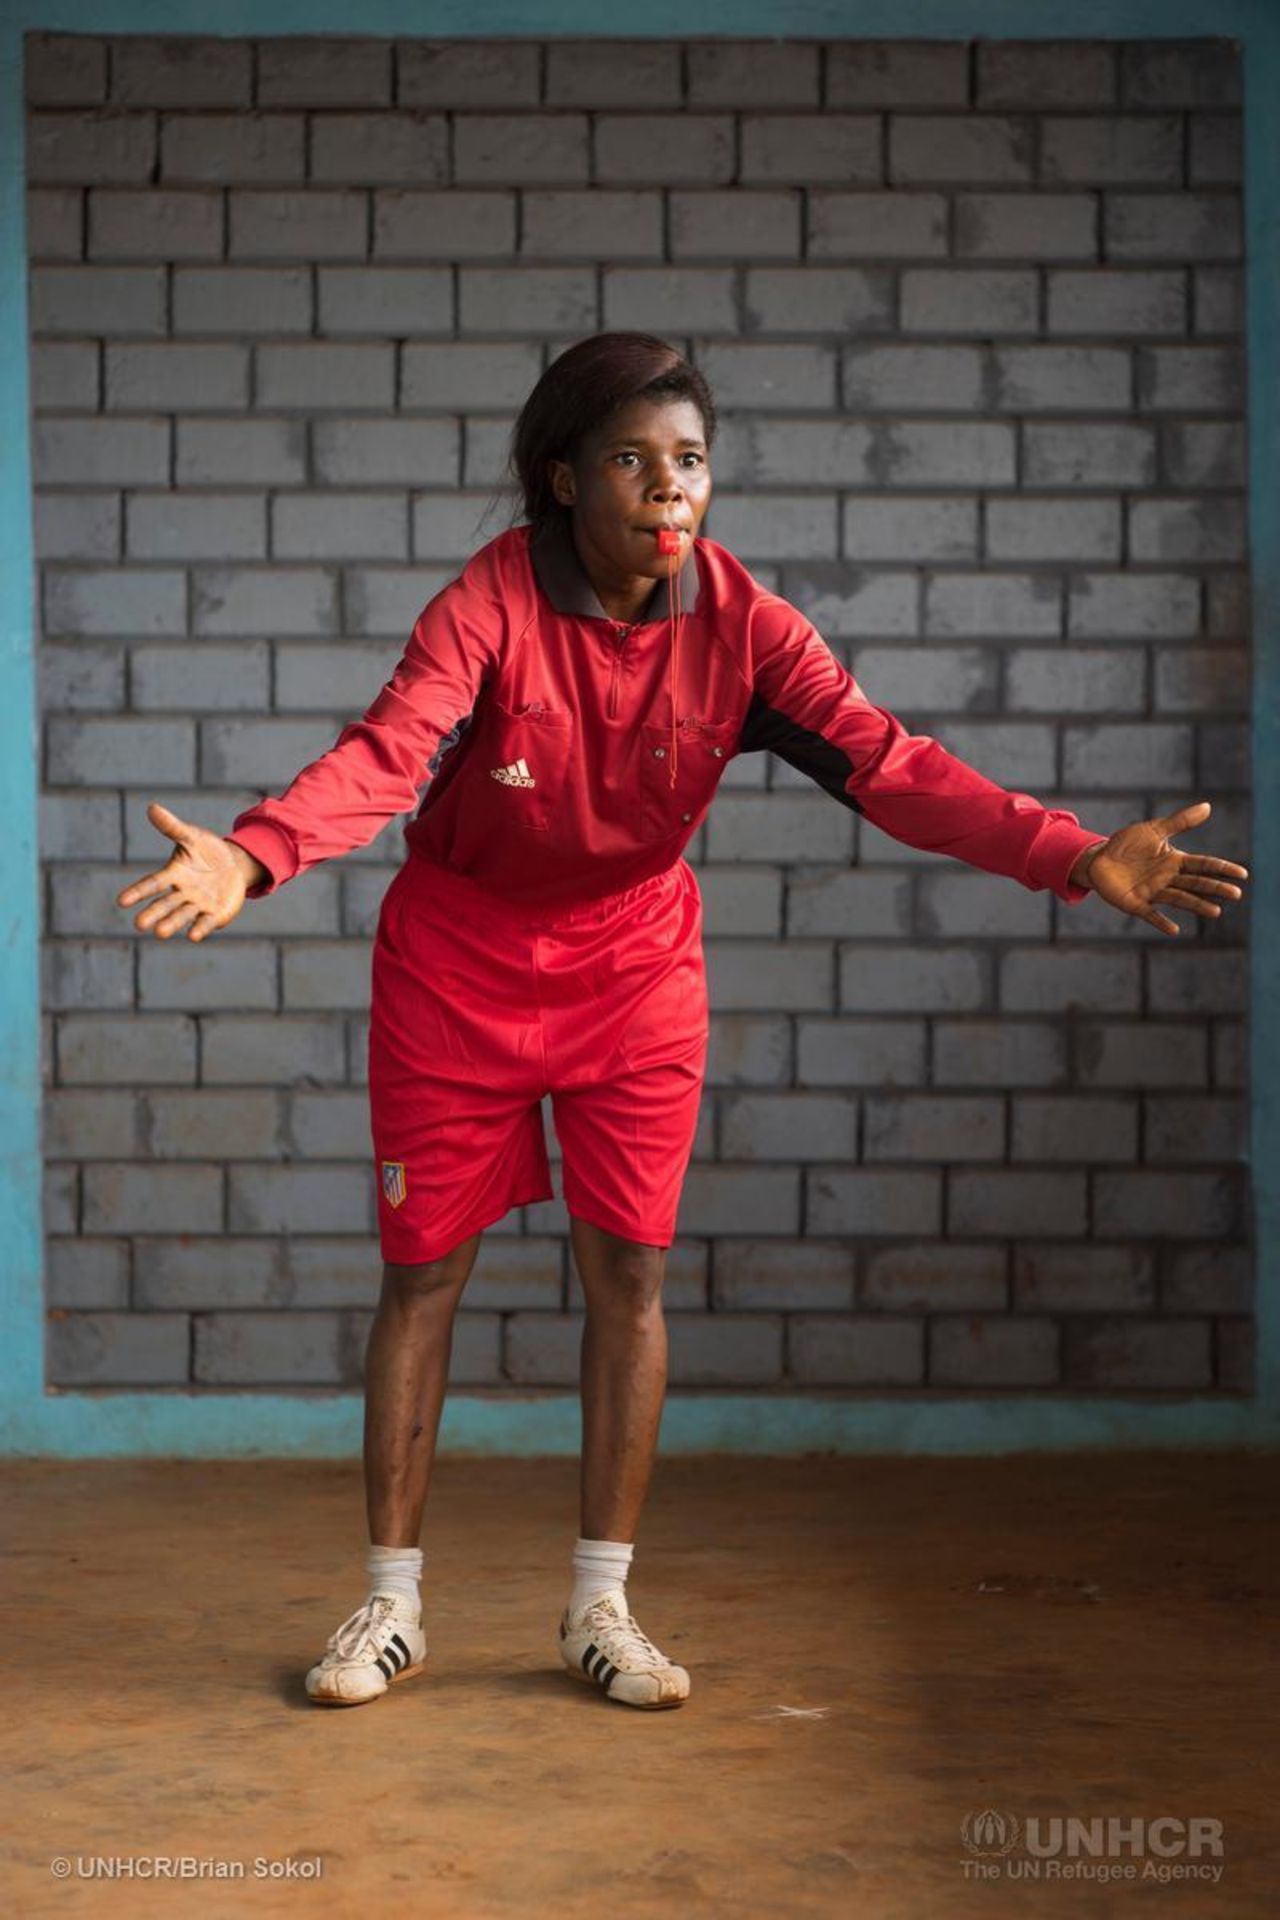 Nadine Adremane, 27, started playing soccer when she was 16, and was eventually selected for the women's national team, where she played for three years. <br /><br />"My best memory is when I received the silver medal in the national championship. I scored the goal that qualified my team."